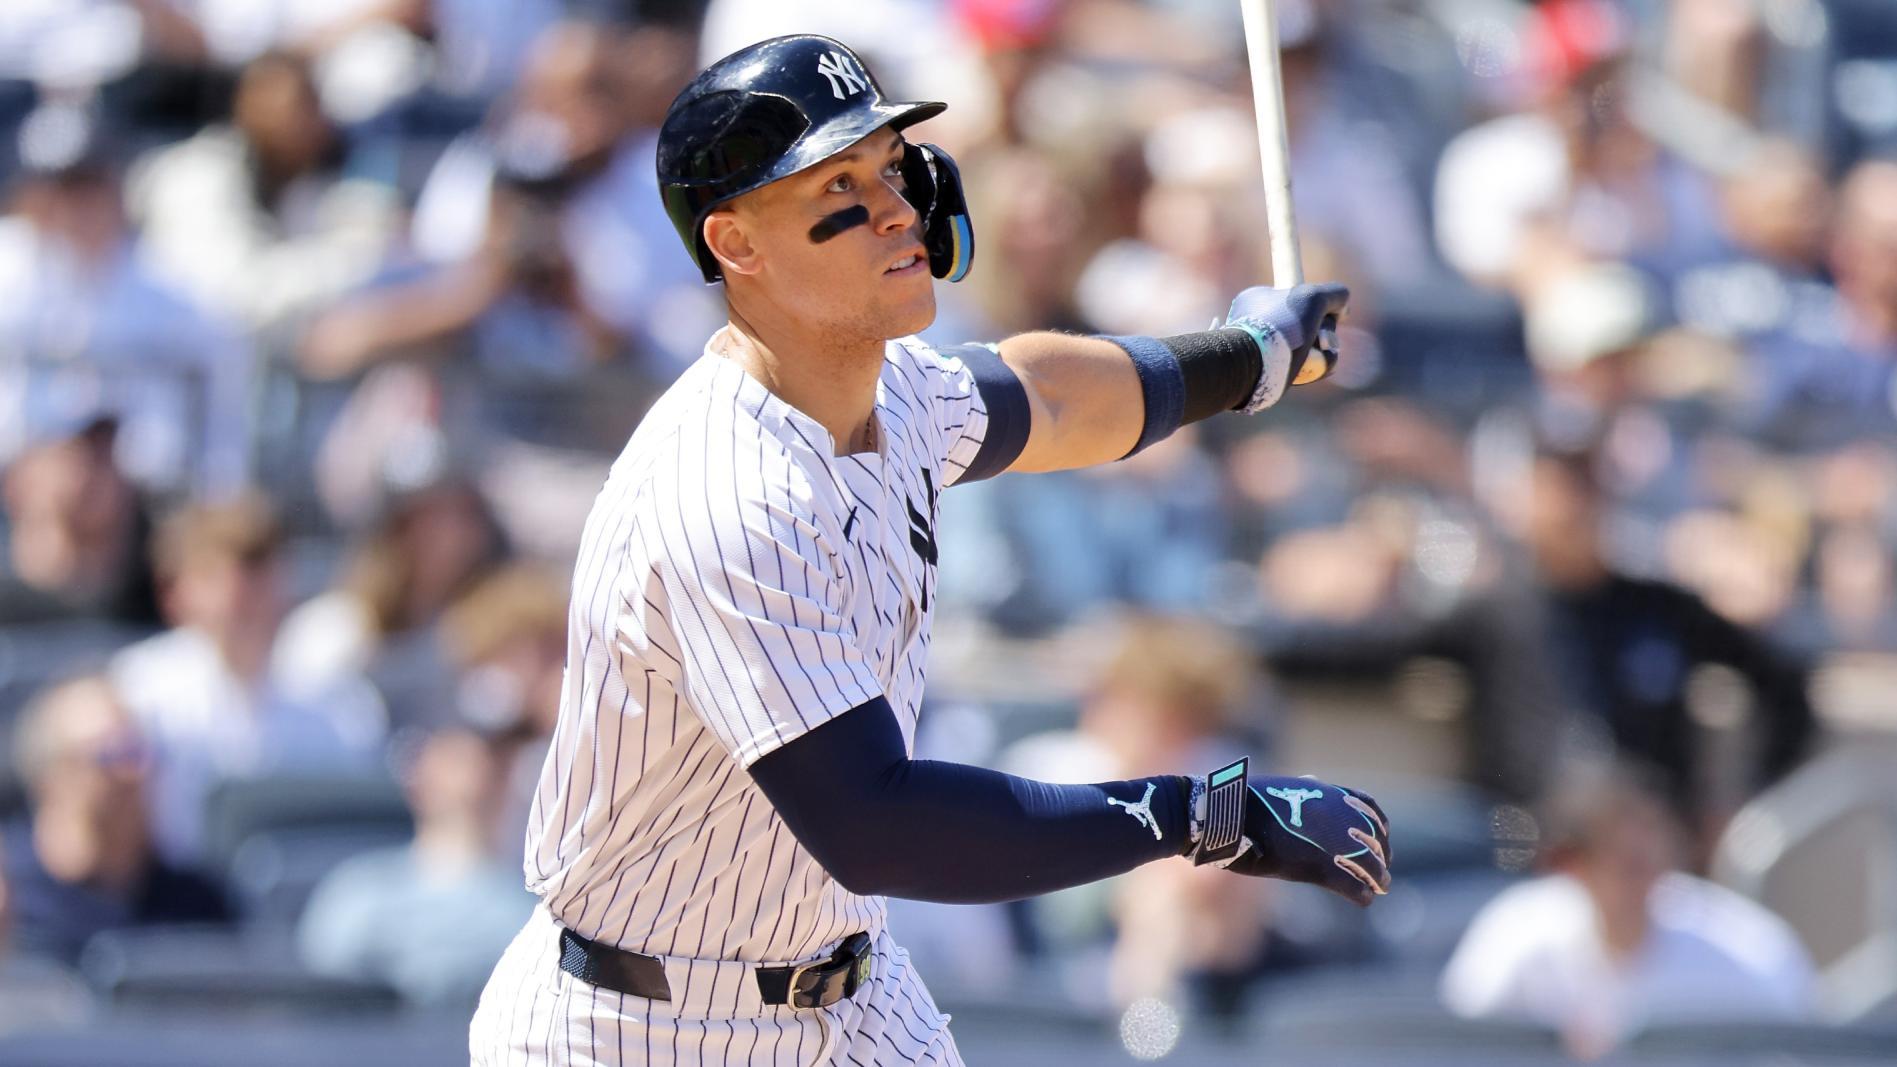 Soto leads Yankees against the White Sox after 4-hit performance